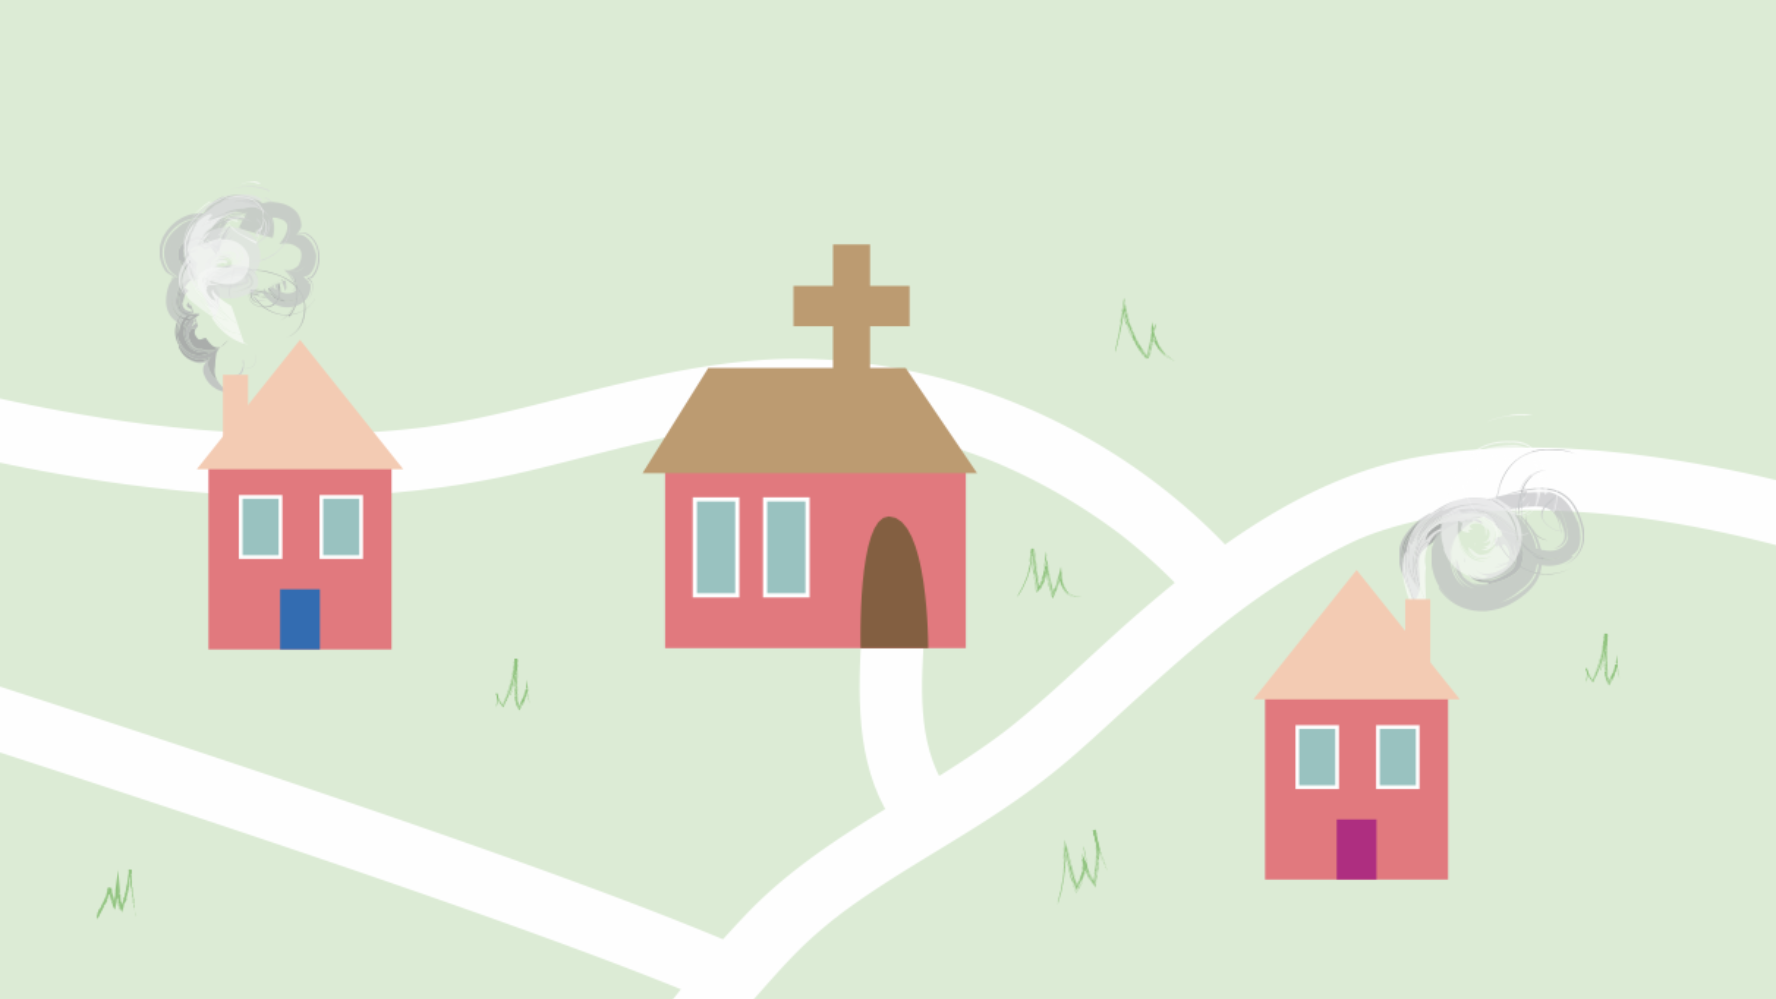 An illustration of houses and a church.